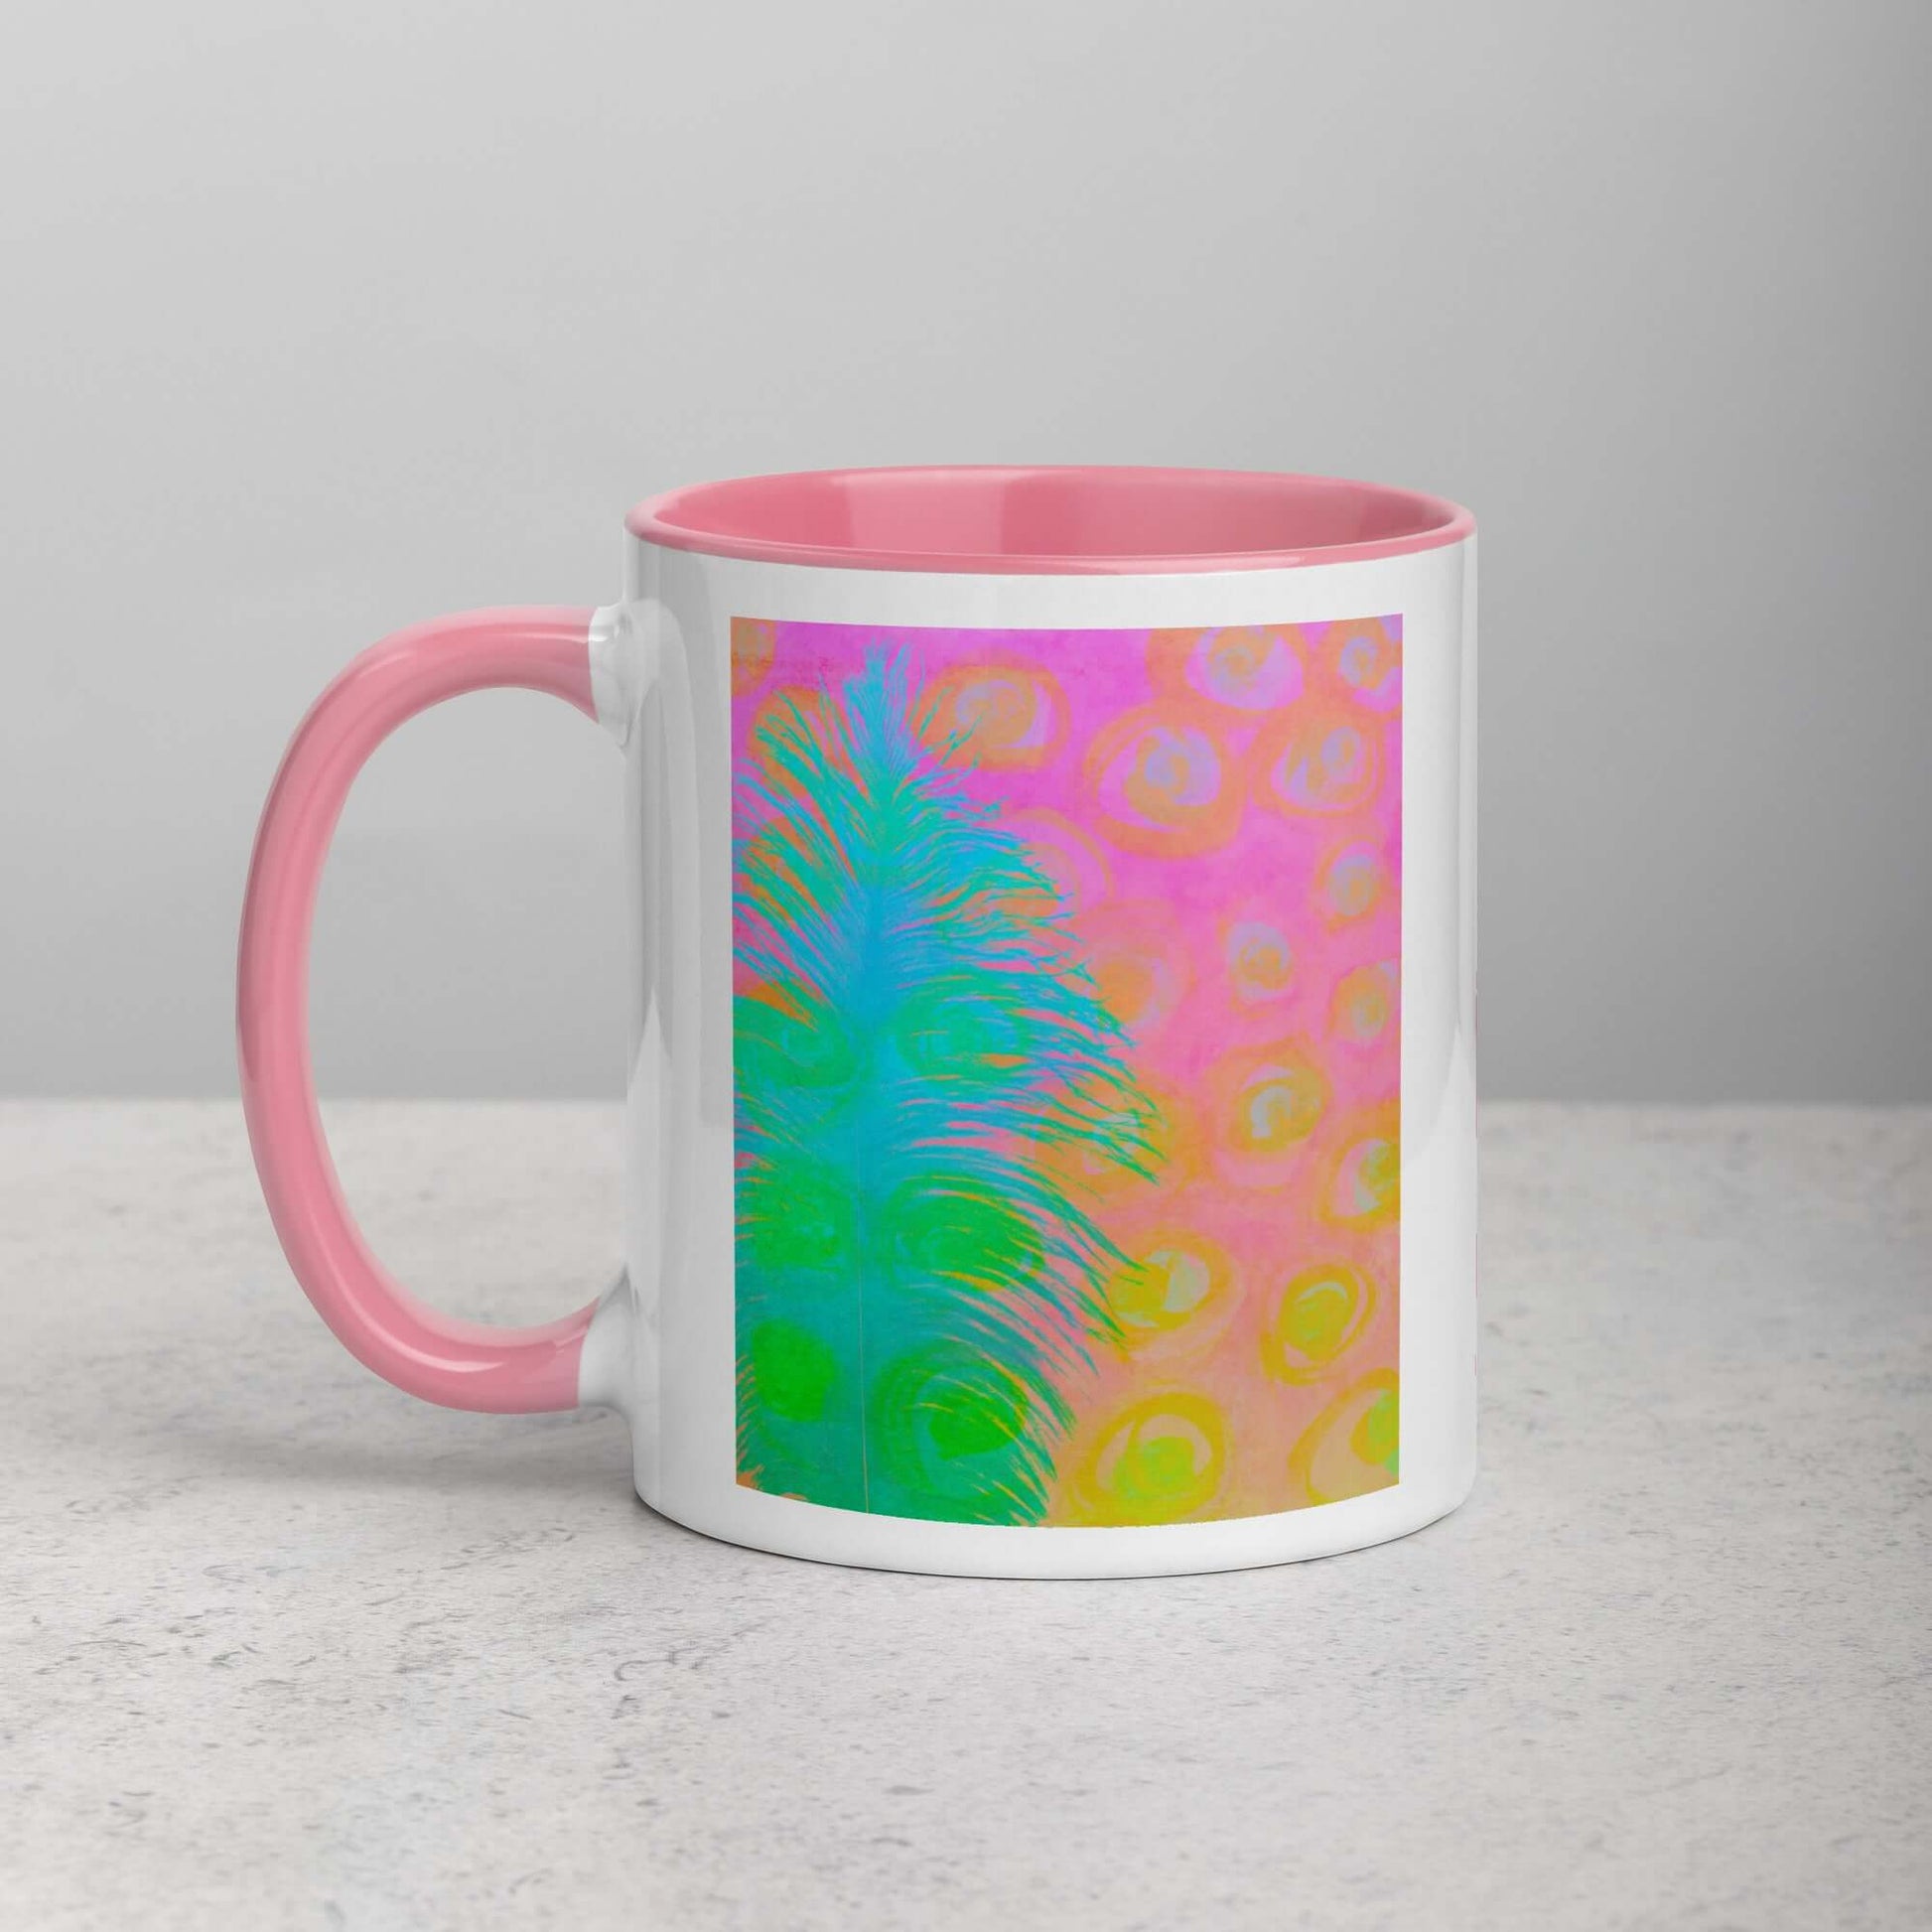 Bright Blue-Green Ostrich Feather on Pink and Yellow Background “My Other Half” Abstract Art Mug with Light Pink Color Inside Left Handed Front View